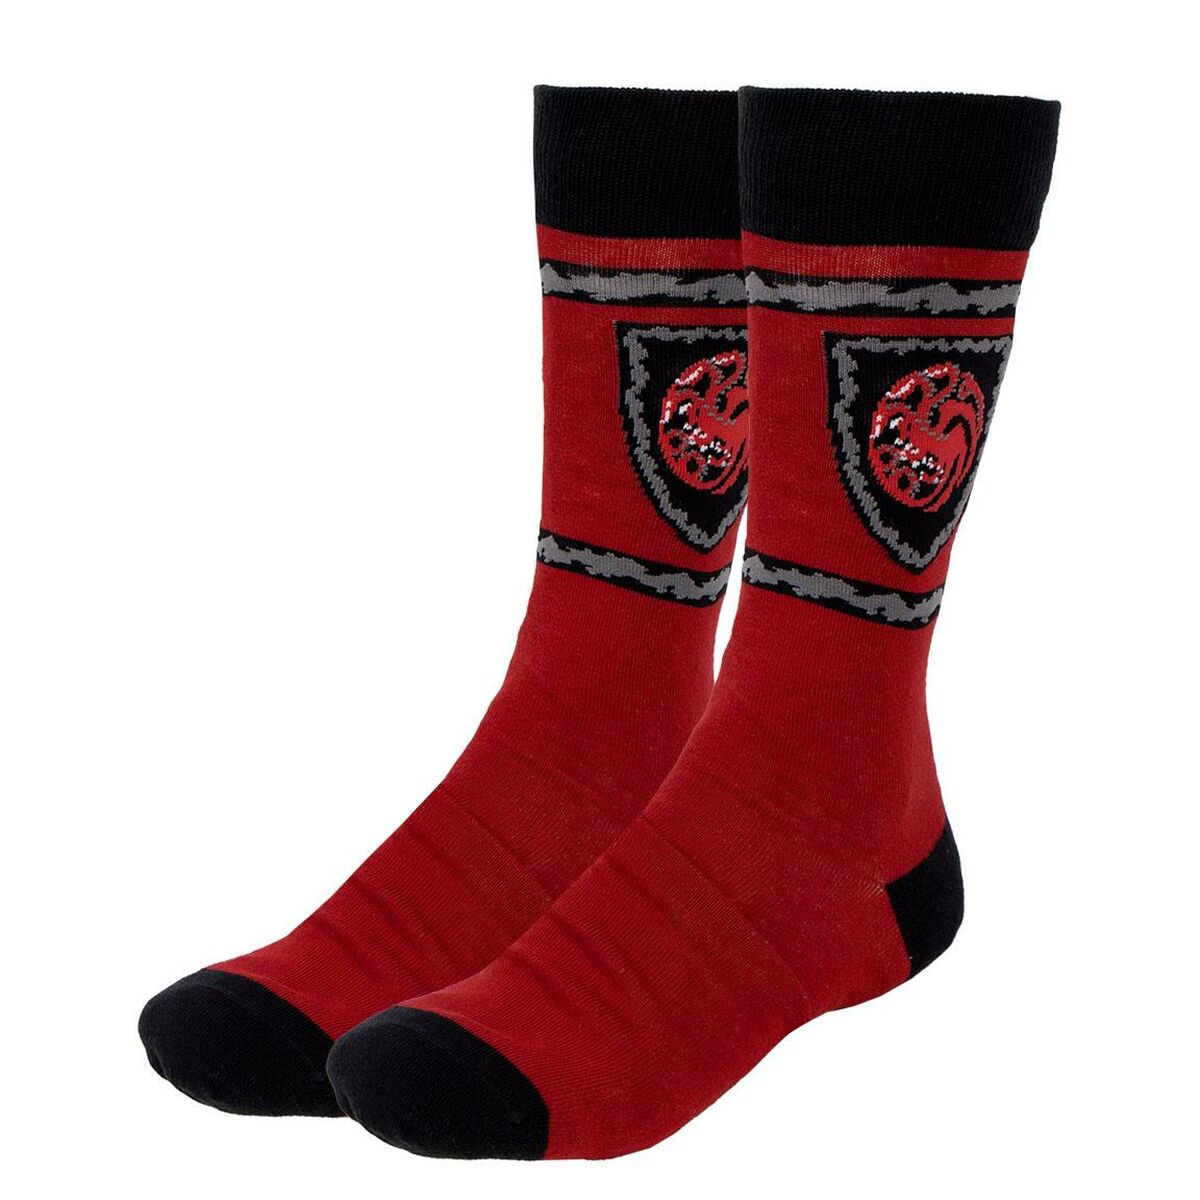 Socks House of Dragon 3 Pieces 40-46